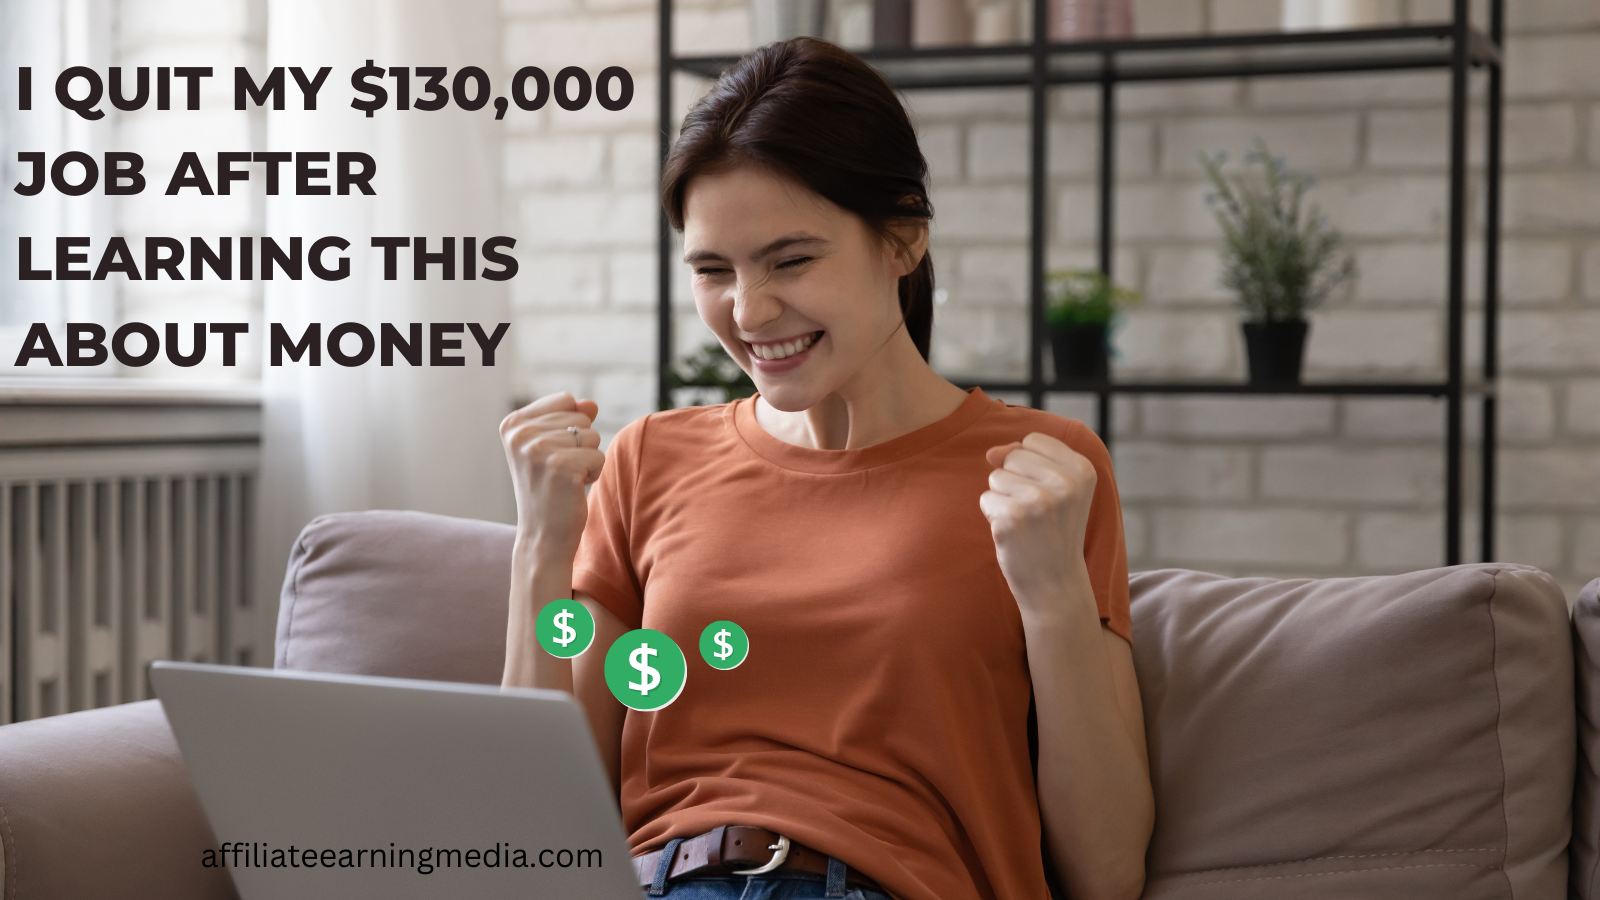 I Quit My $130,000 Job After Learning This About Money